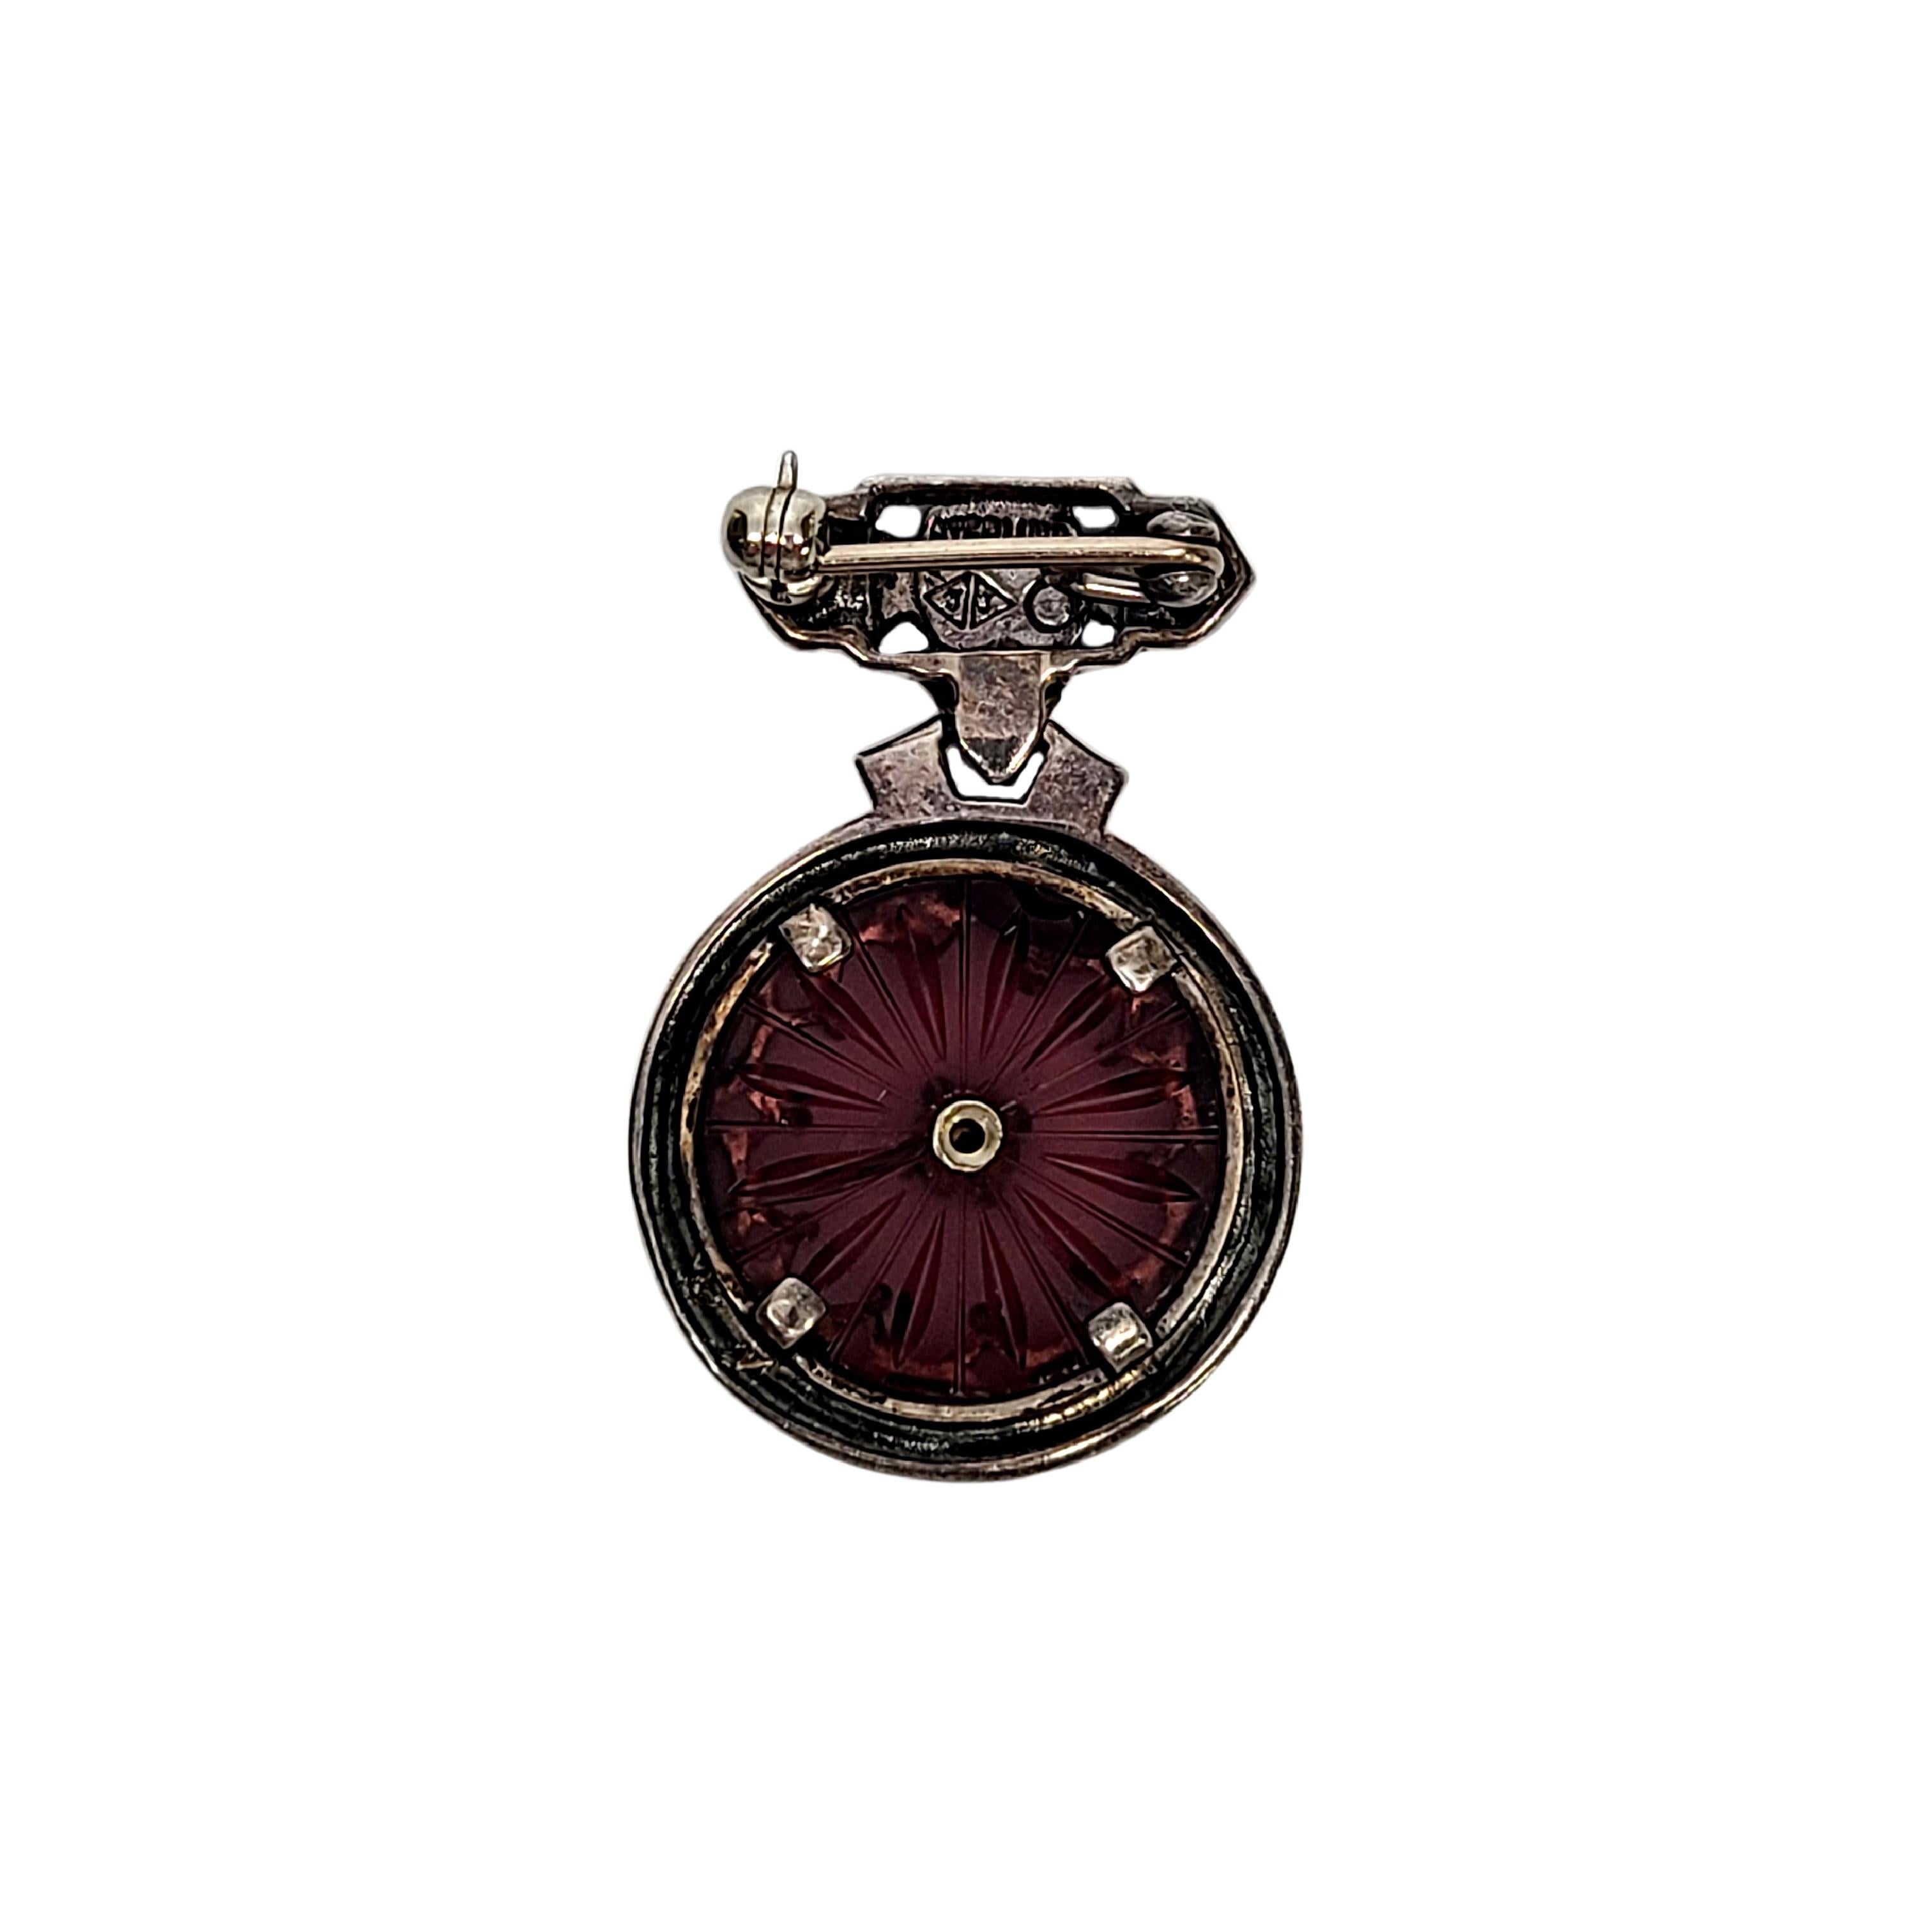 Sterling silver, marcasite and purple camphor glass pin by Judith Jack.

Beautiful art deco design features purple camphor glass framed in marcasite encrusted sterling silver. Features a small bezel set marcasite at its center.

Measures 1 3/8